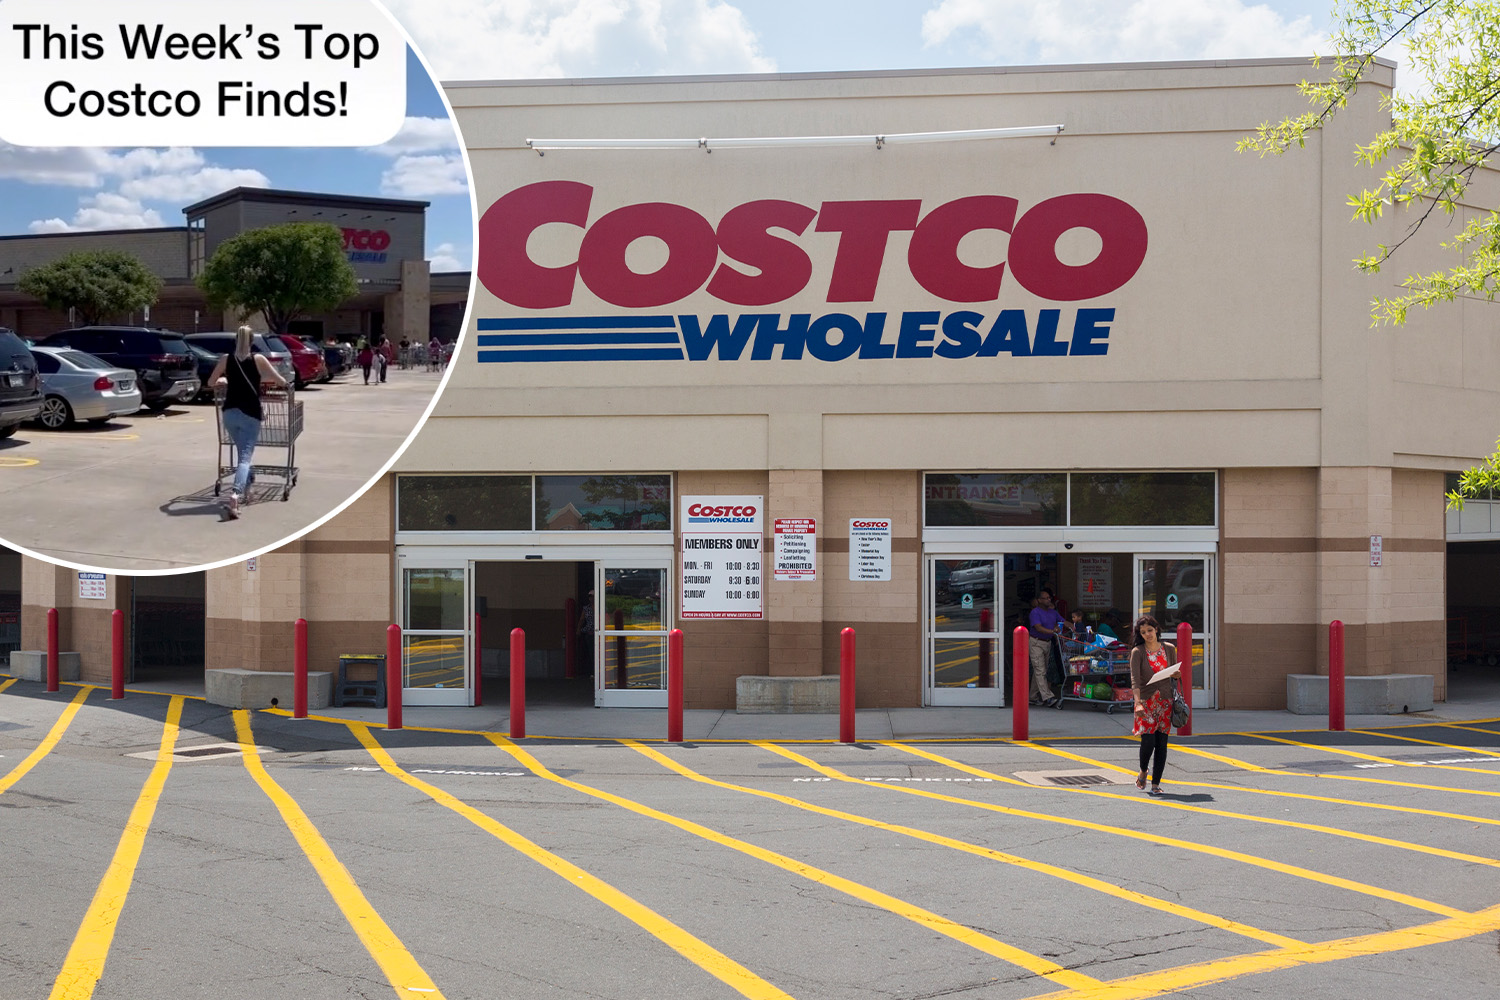 I'm a Costco expert - 5 must-buys starting at $9 including a pumpkin flavor